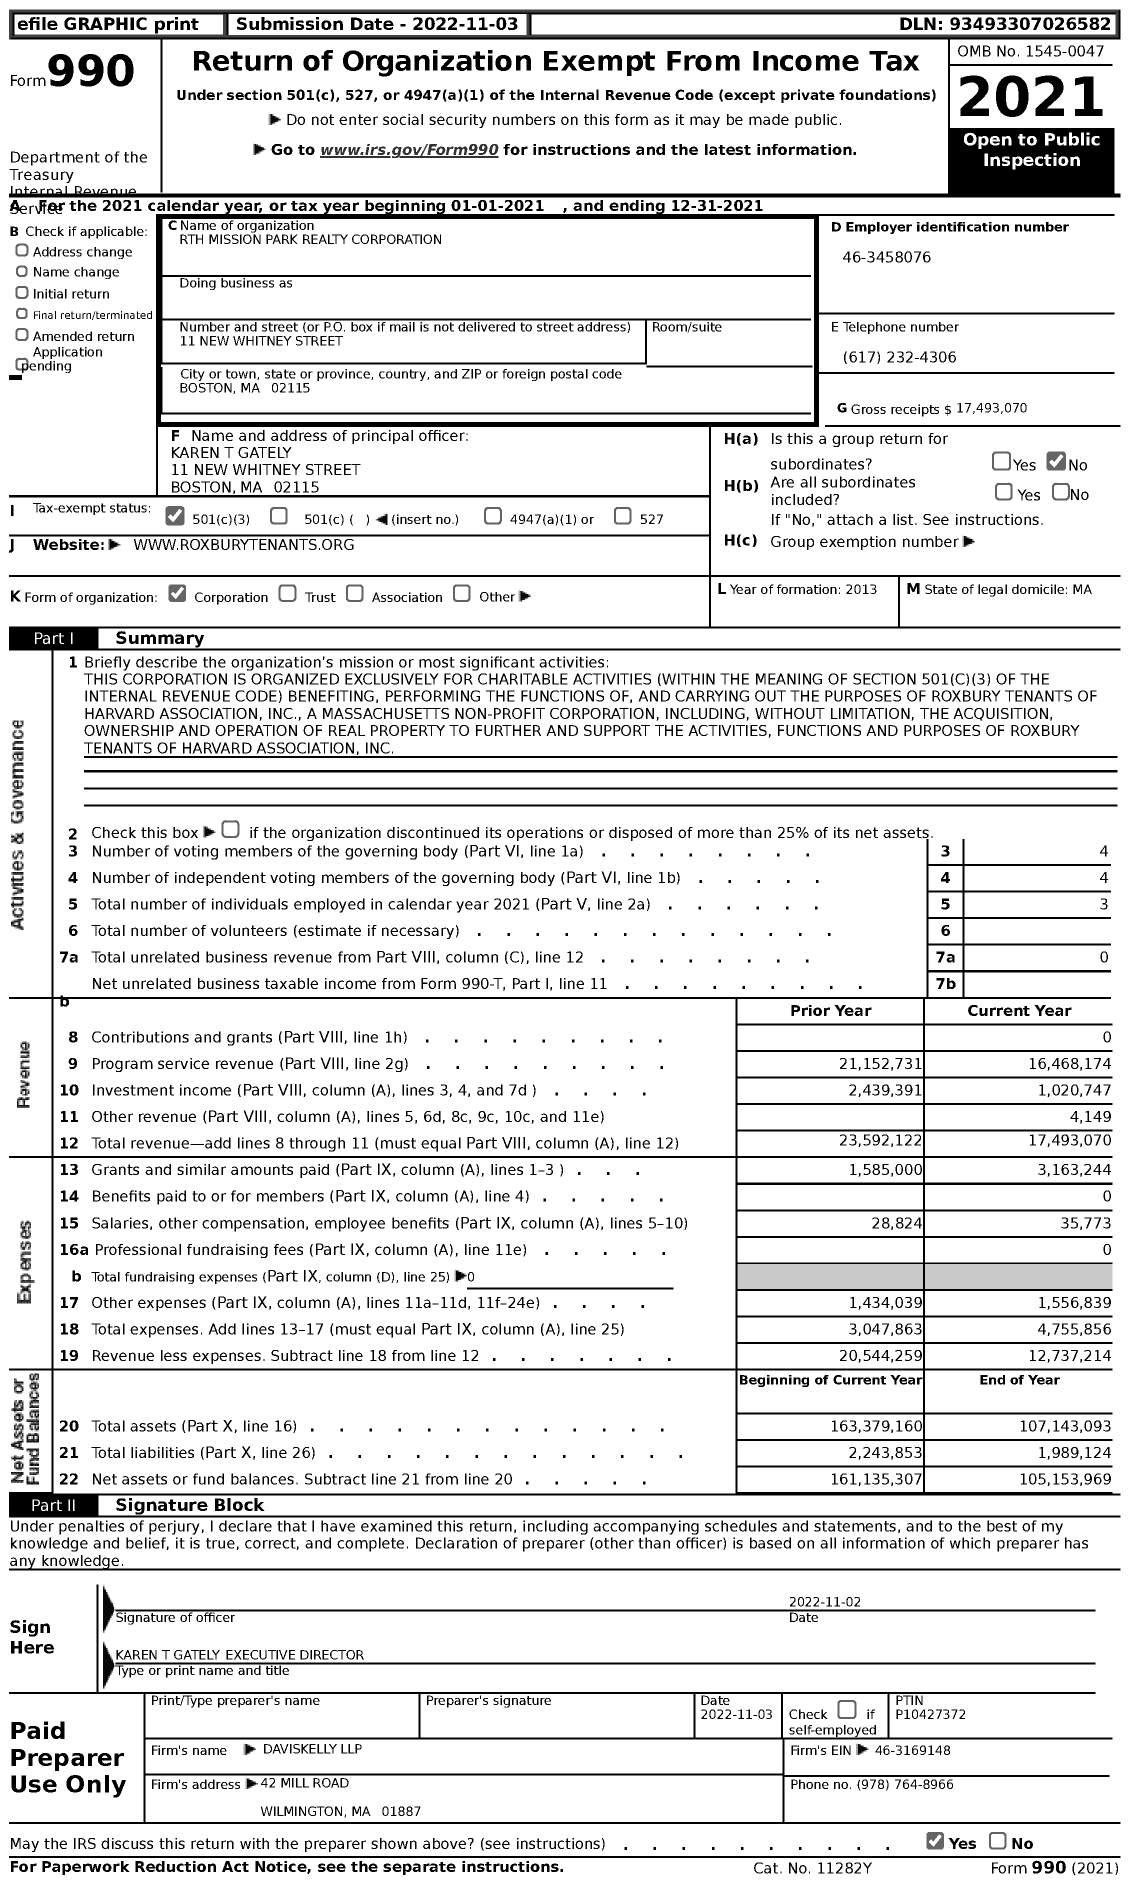 Image of first page of 2021 Form 990 for RTH Mission Park Realty Corporation